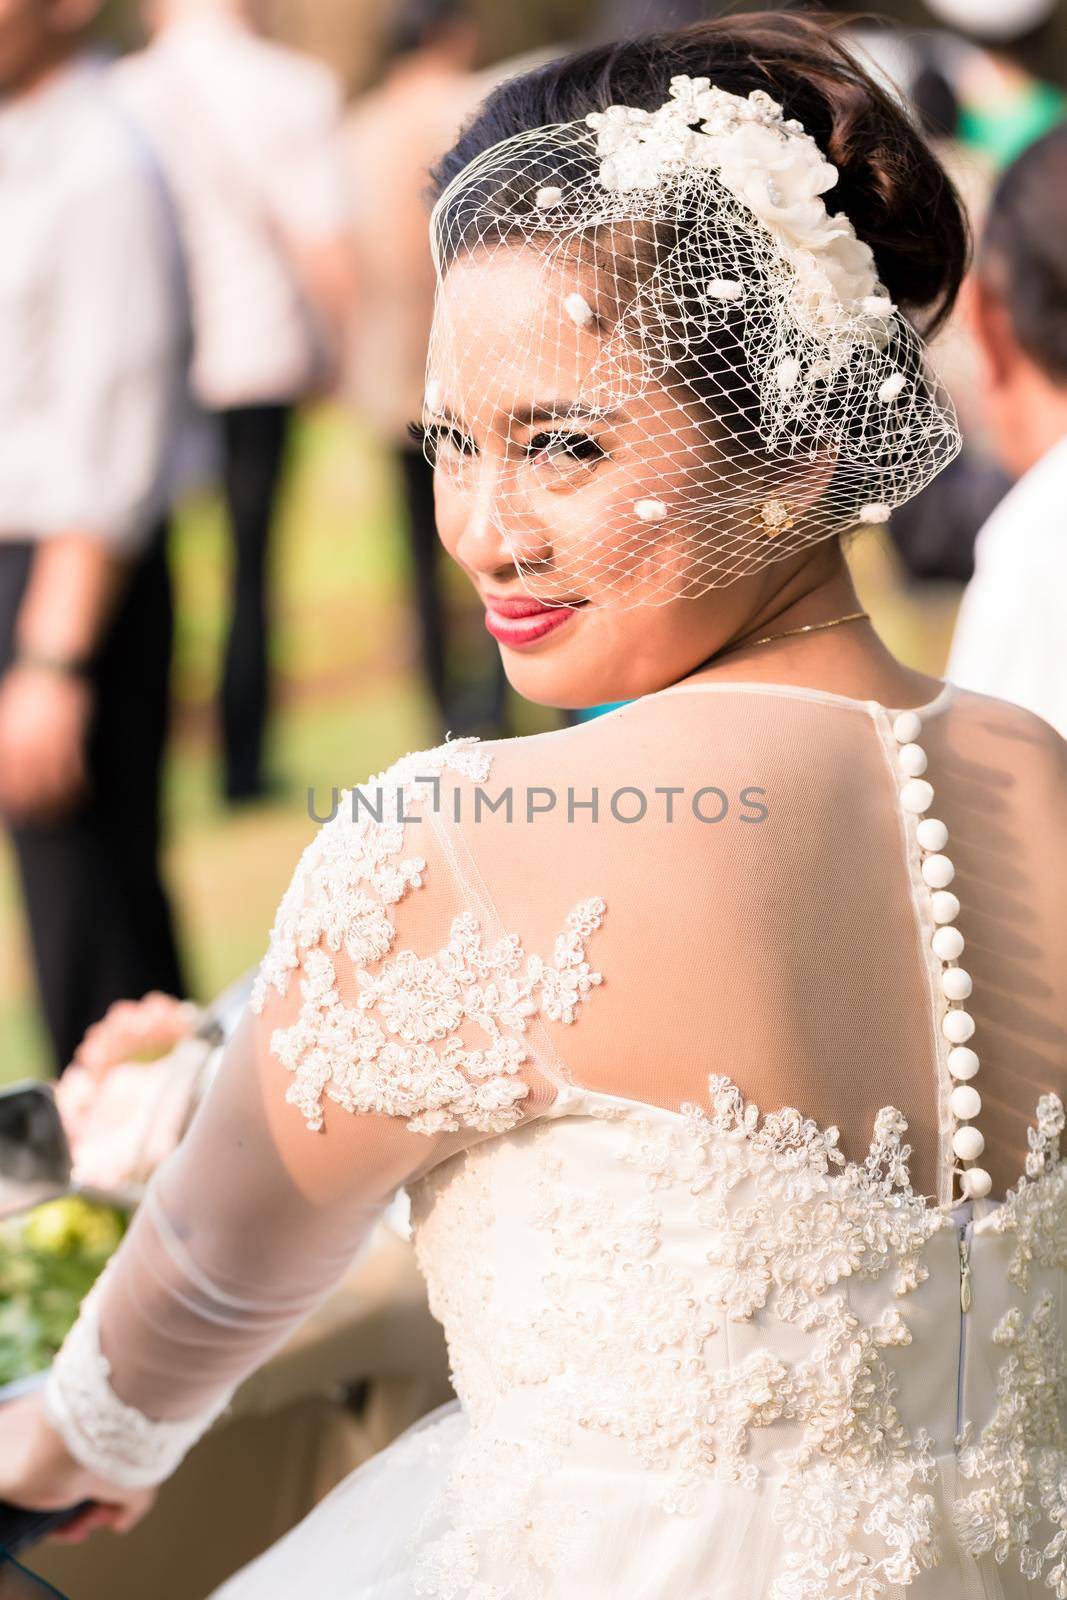 Indonesian bride on her wedding looking into camera by Kzenon